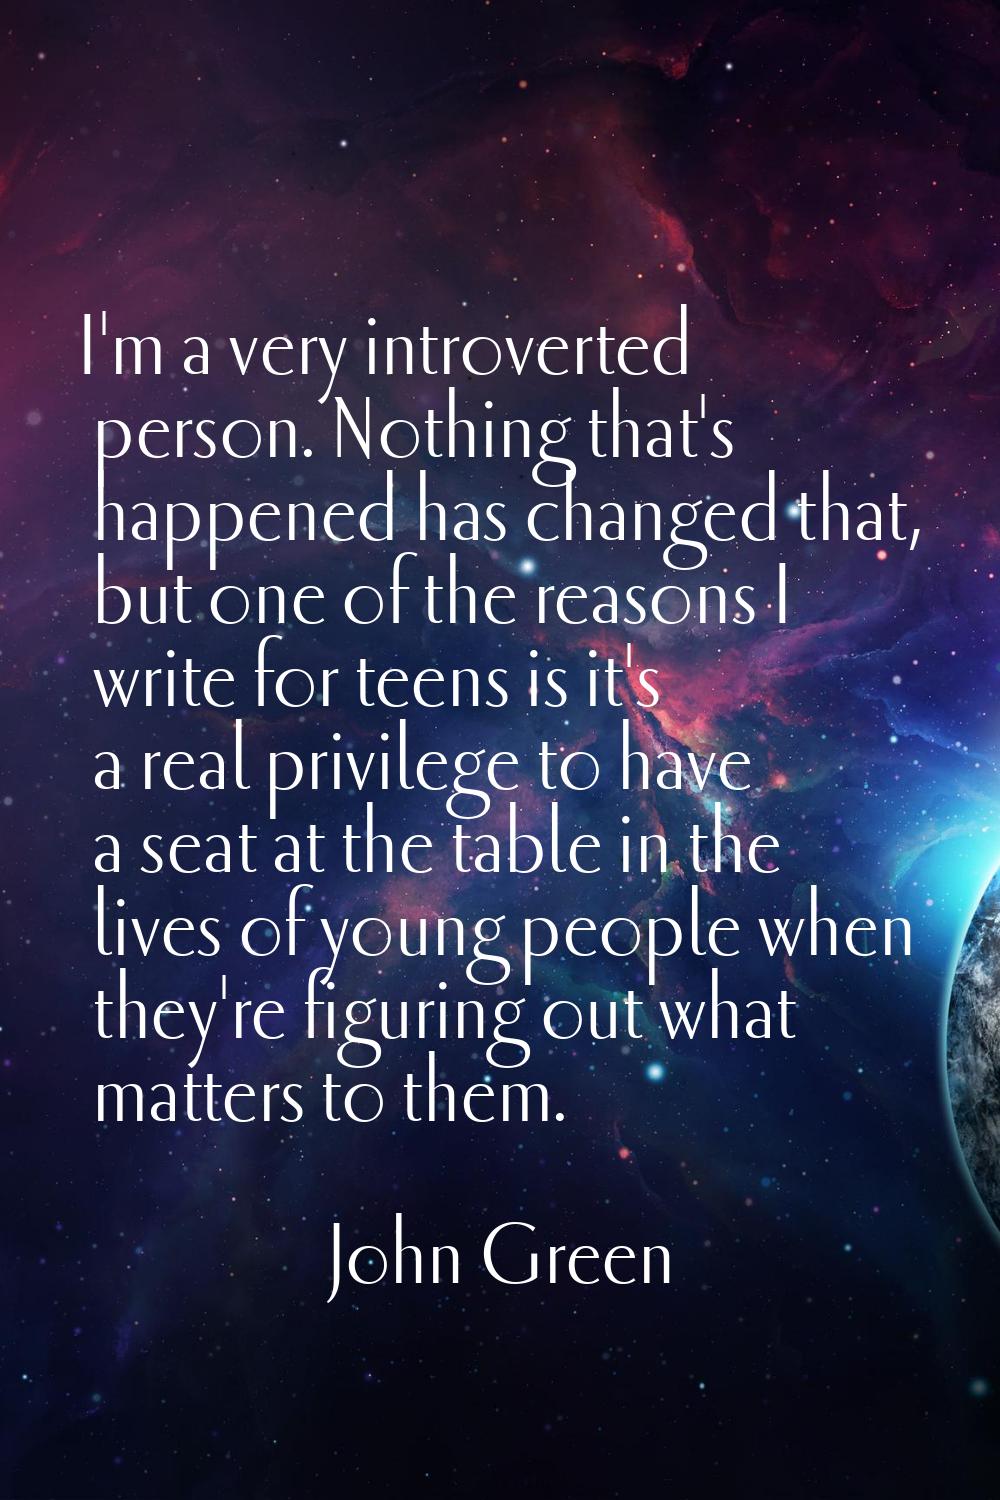 I'm a very introverted person. Nothing that's happened has changed that, but one of the reasons I w